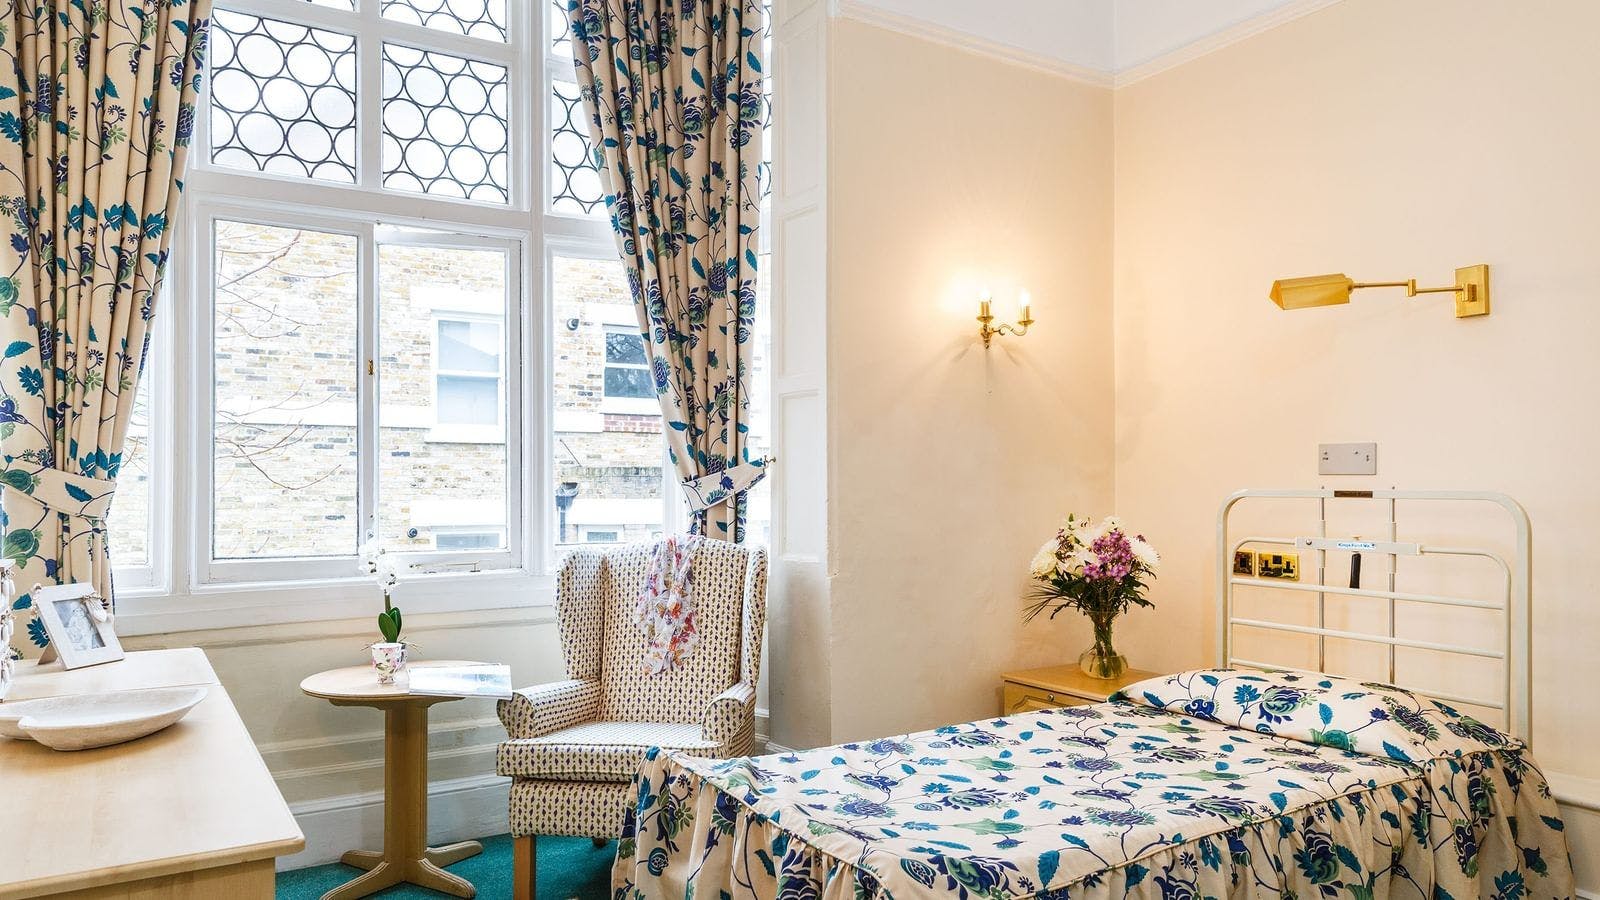 Bedroom at The Pines Care Home in London, England